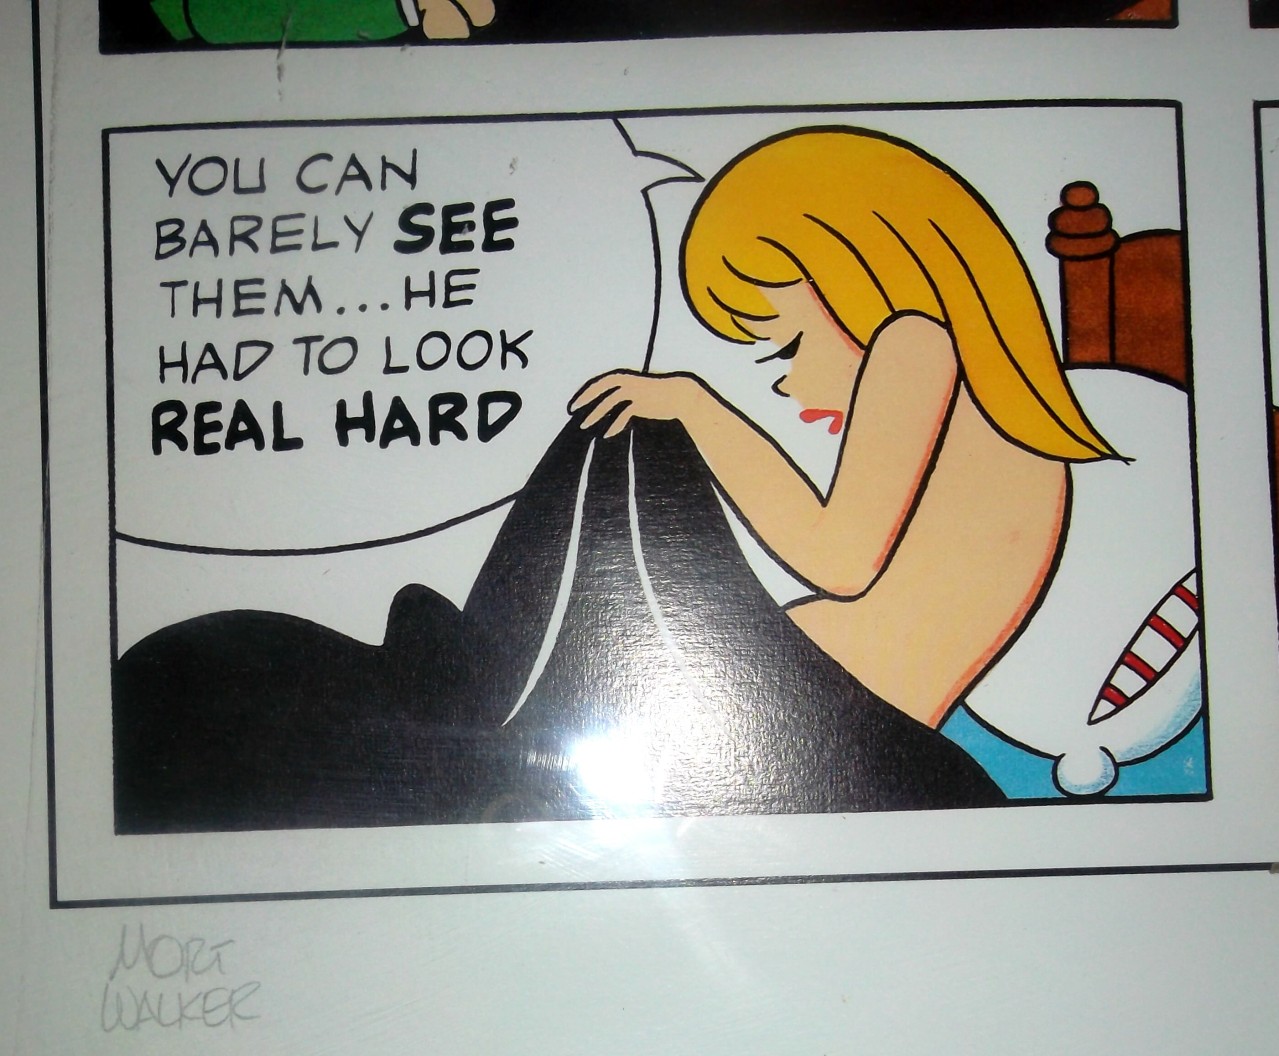 Free beetle bailey porn - Nude pic